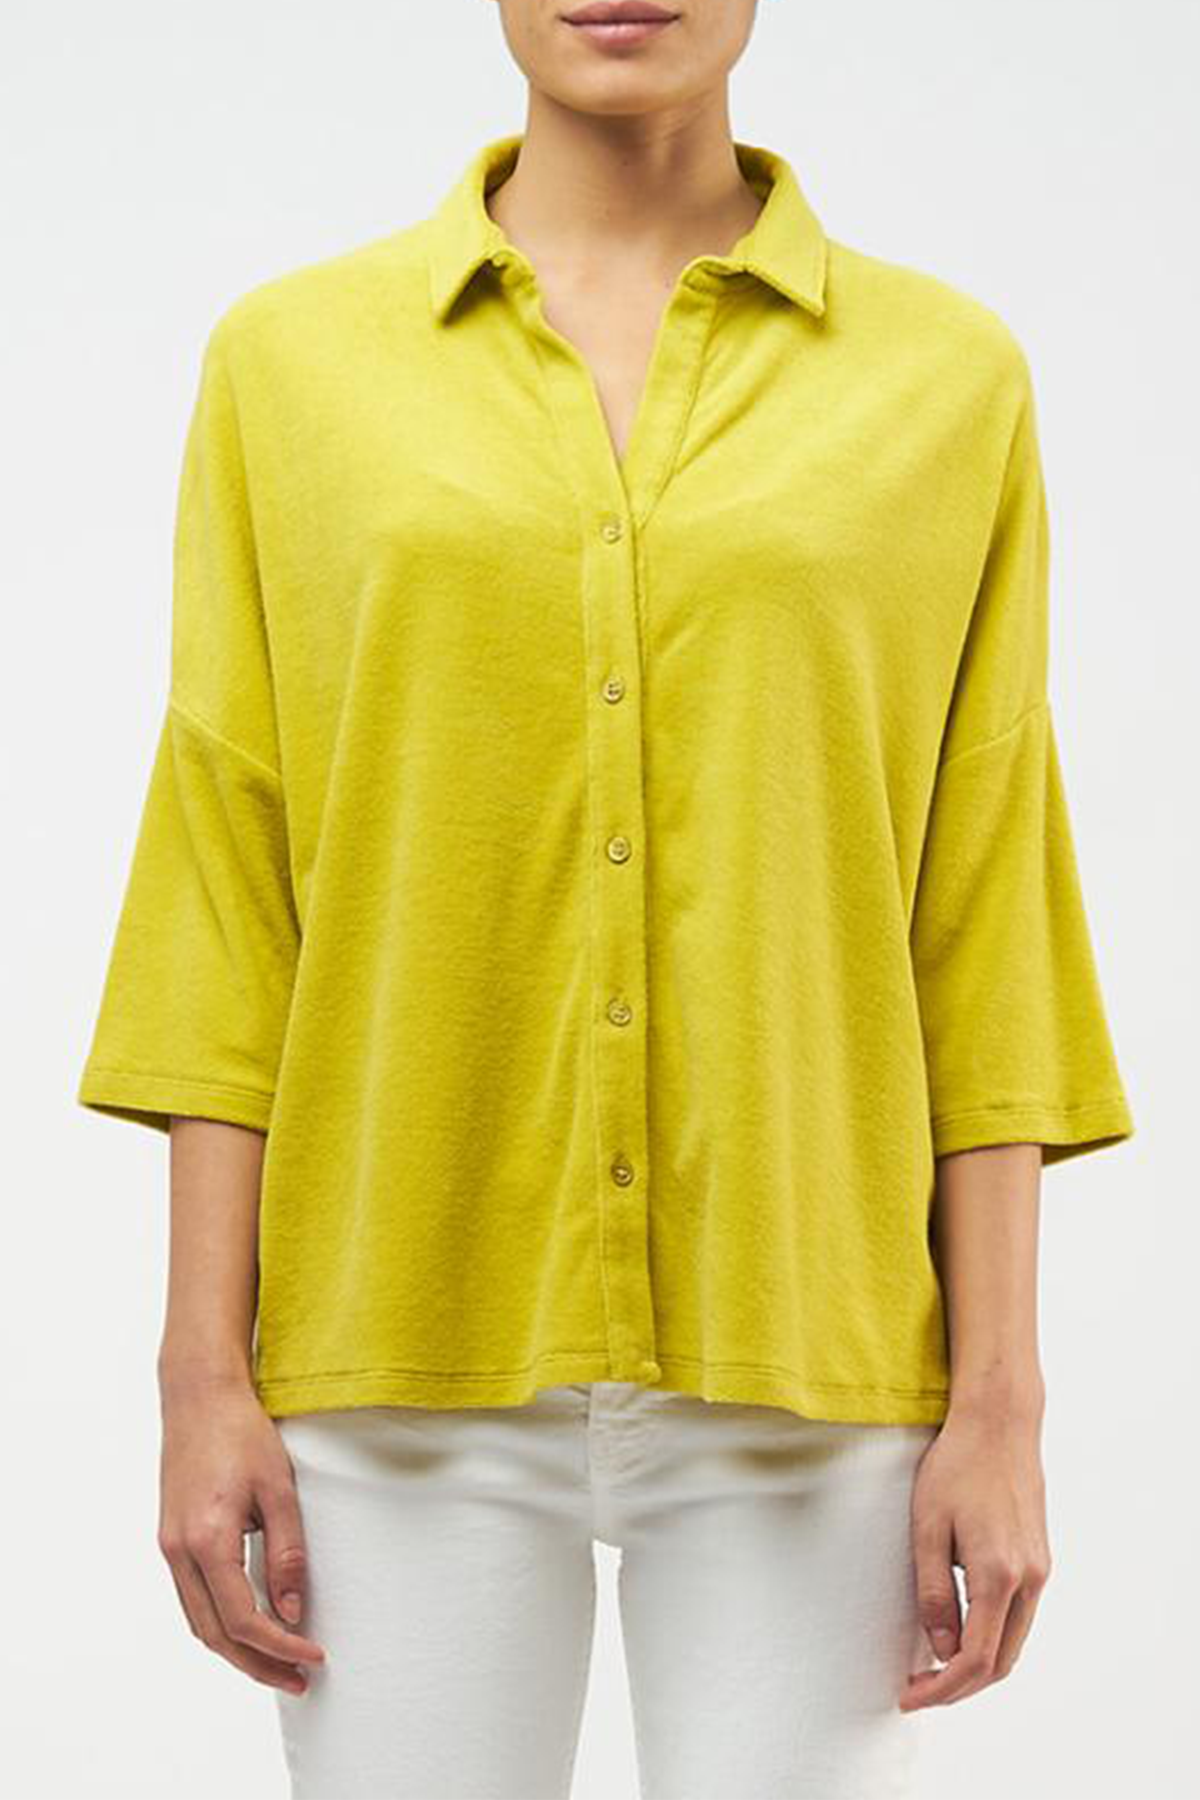 Majestic Filatures Cotton Modal Terry Semi Relaxed Shirt